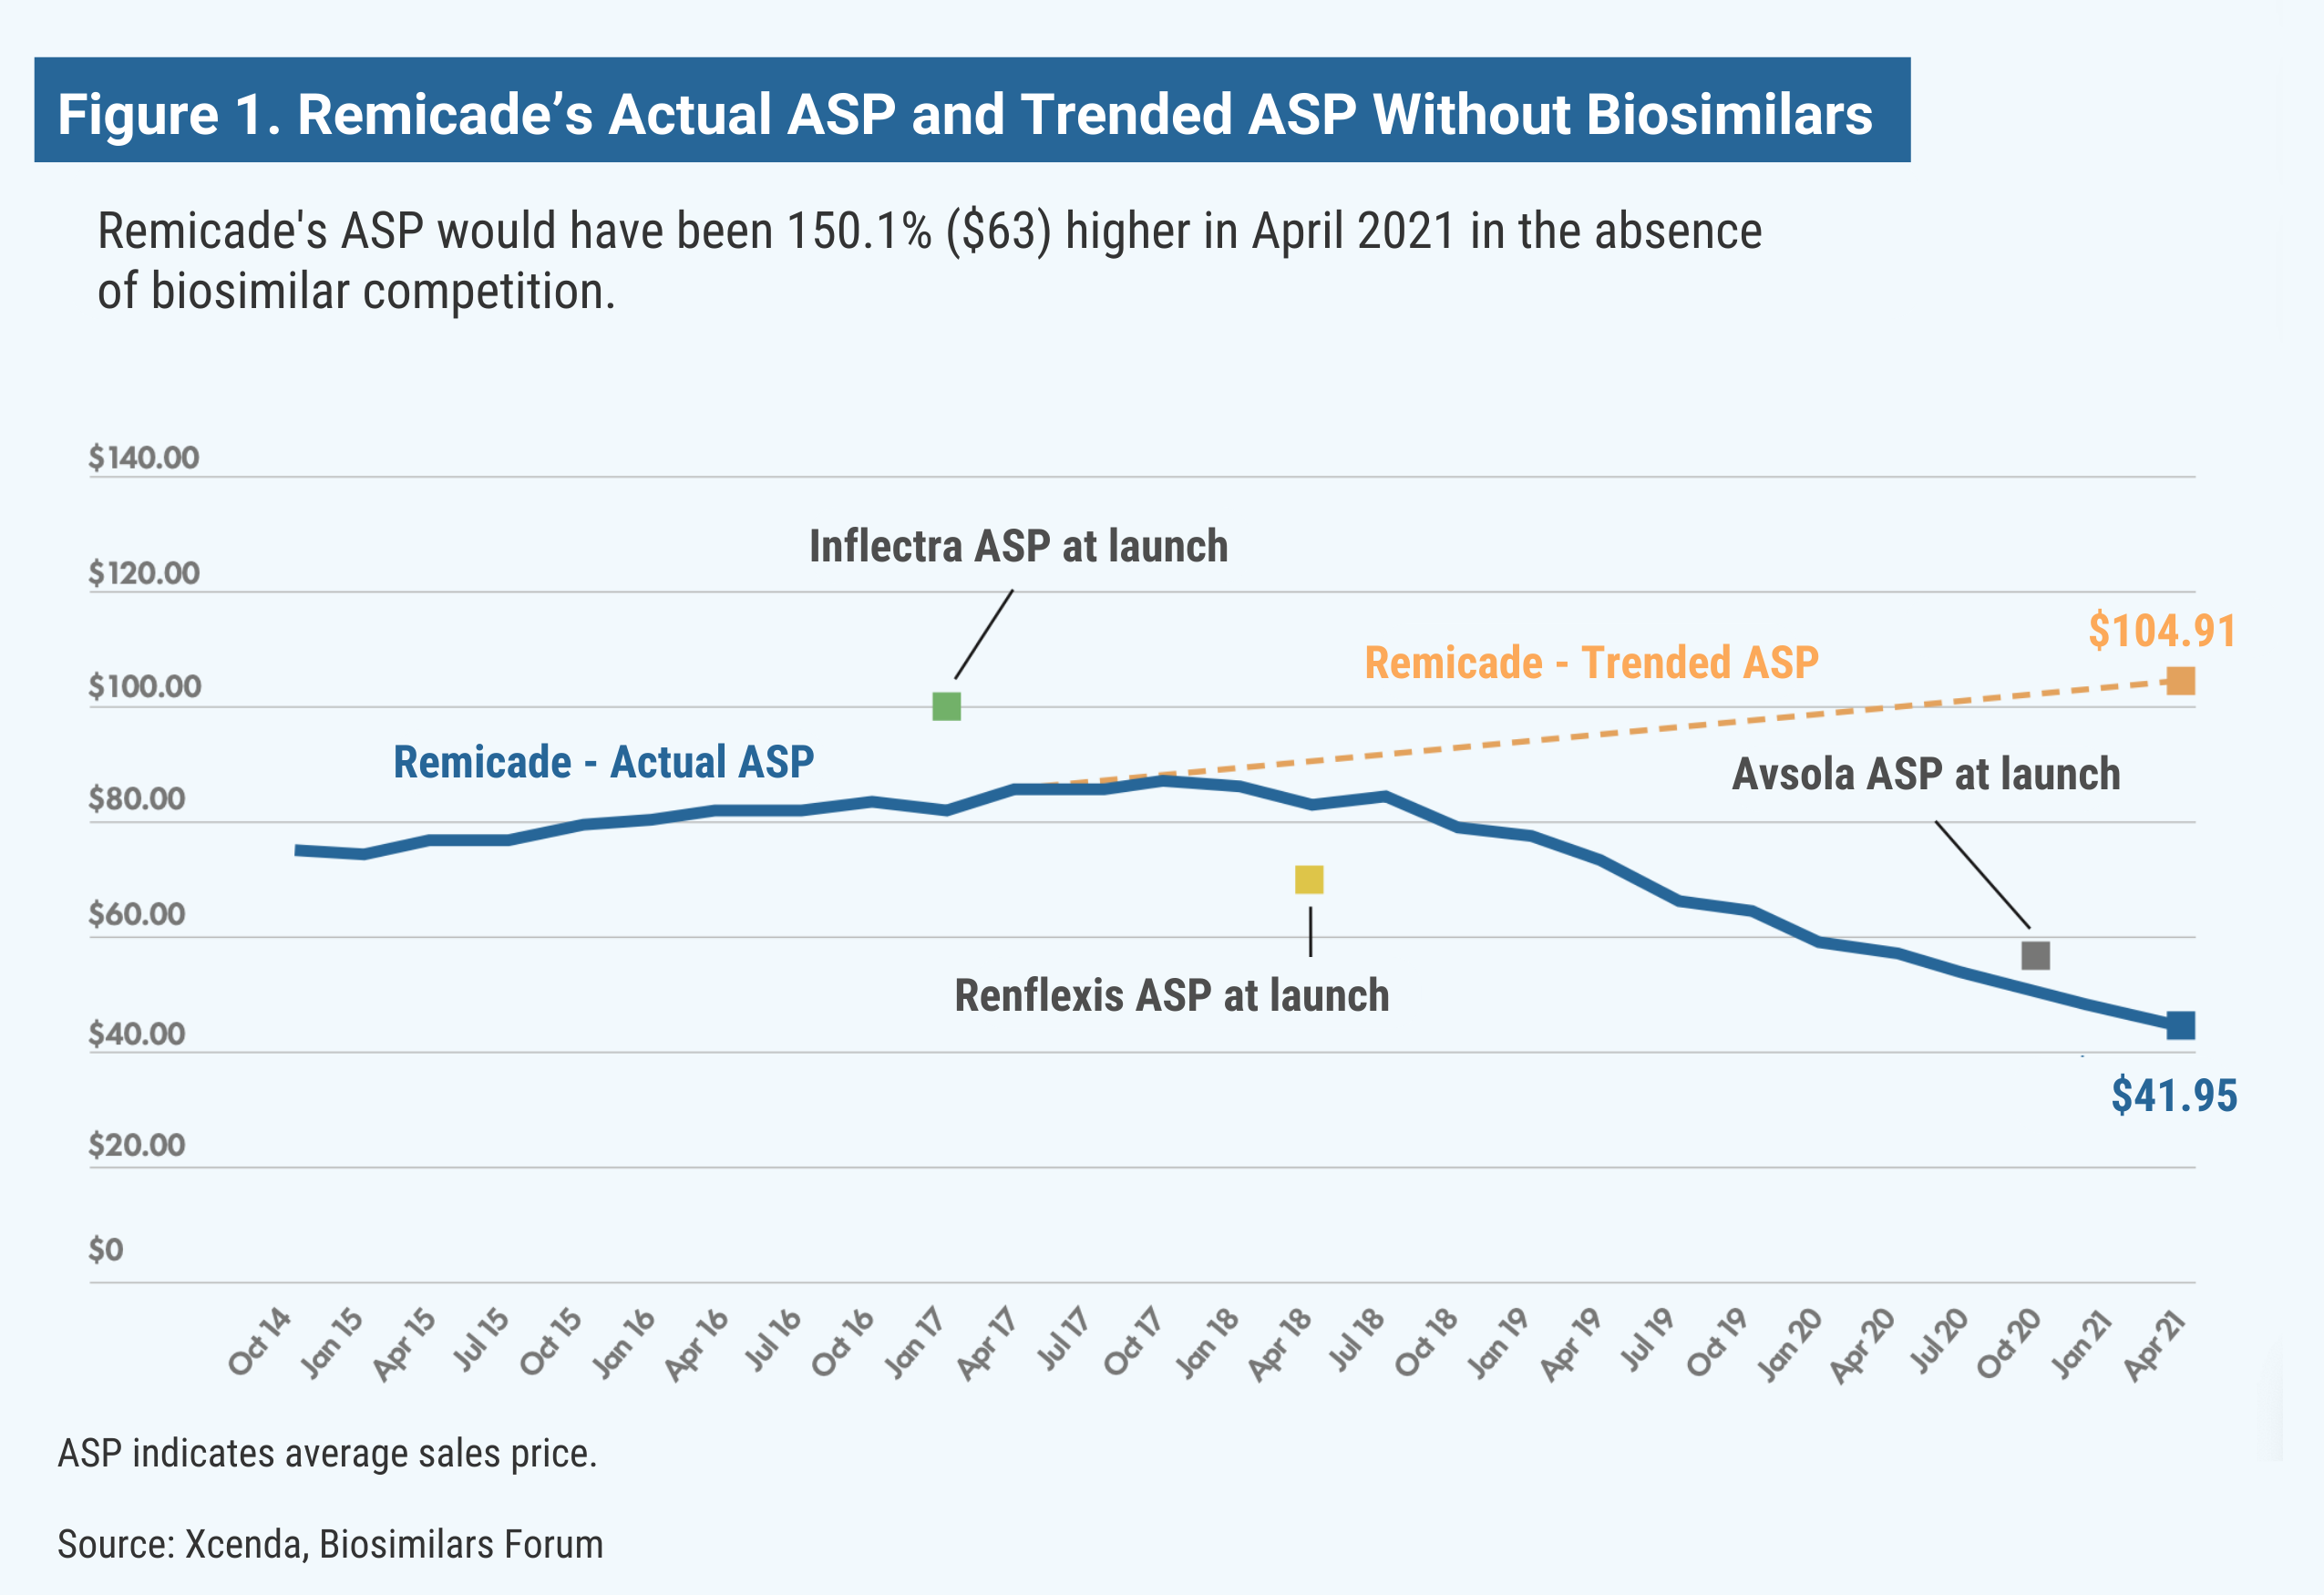 Figure 1. Remicade’s Actual ASP and Trended ASP Without Biosimilars